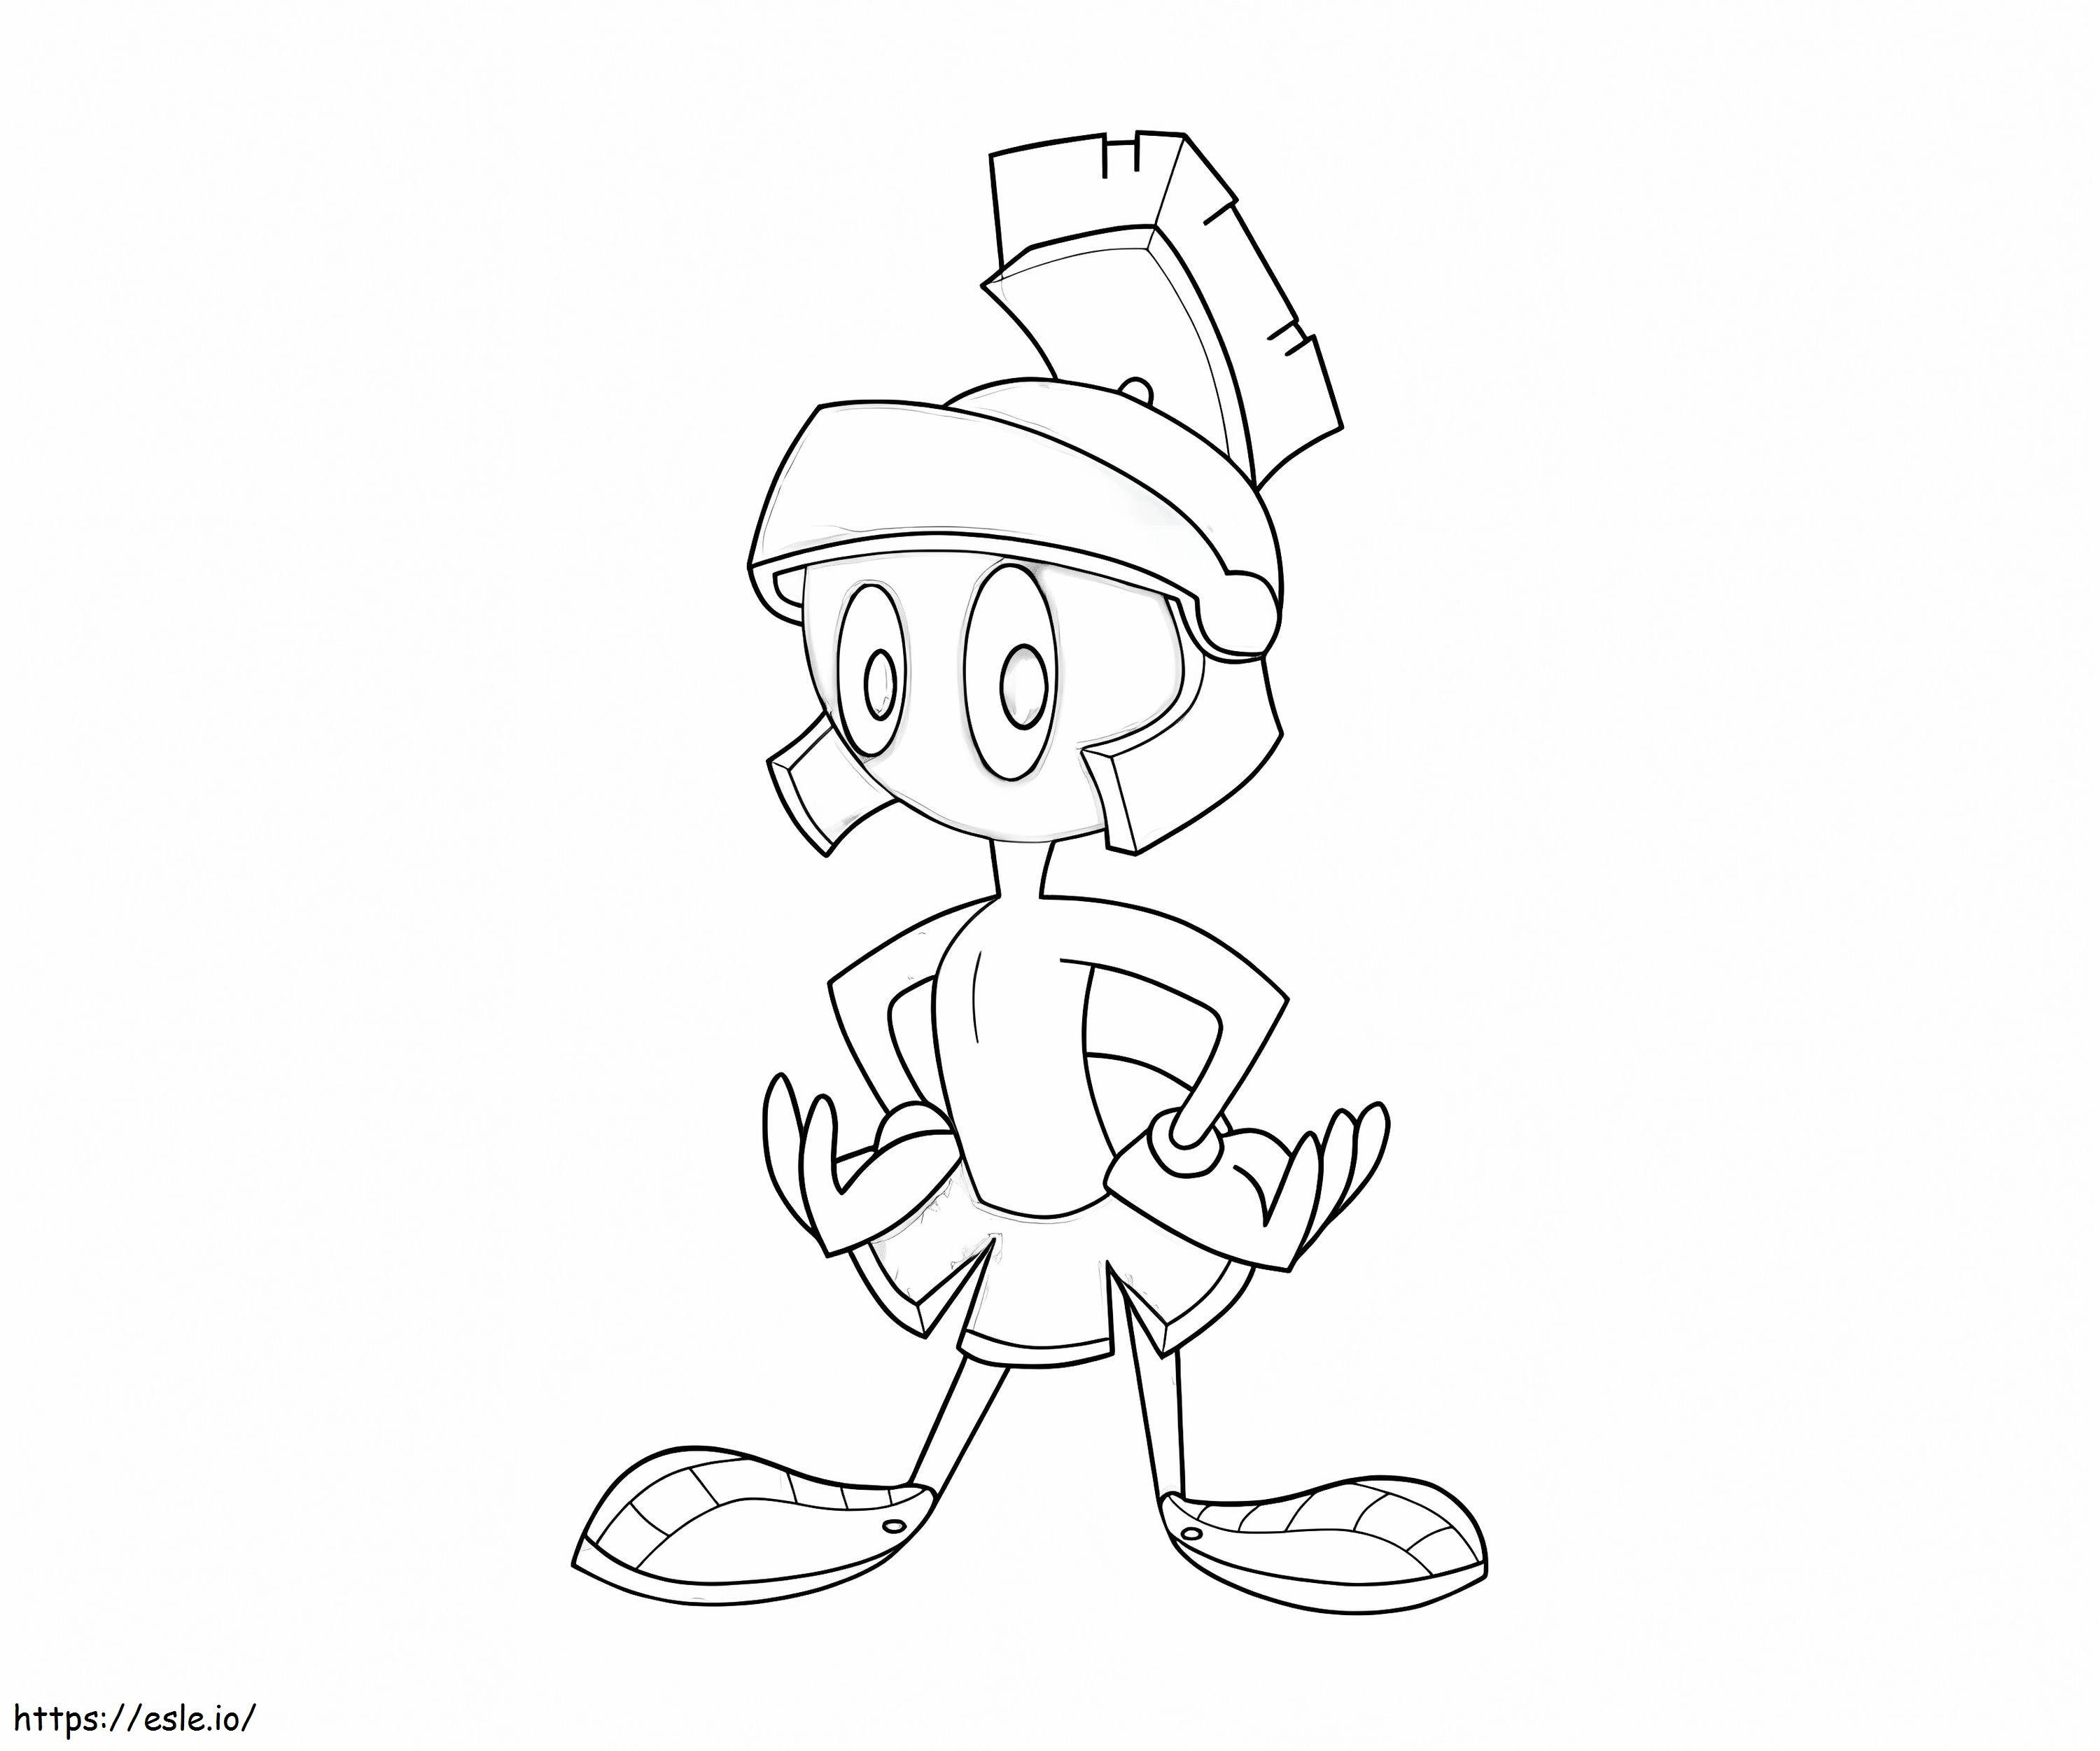 Marvin The Martian 9 coloring page